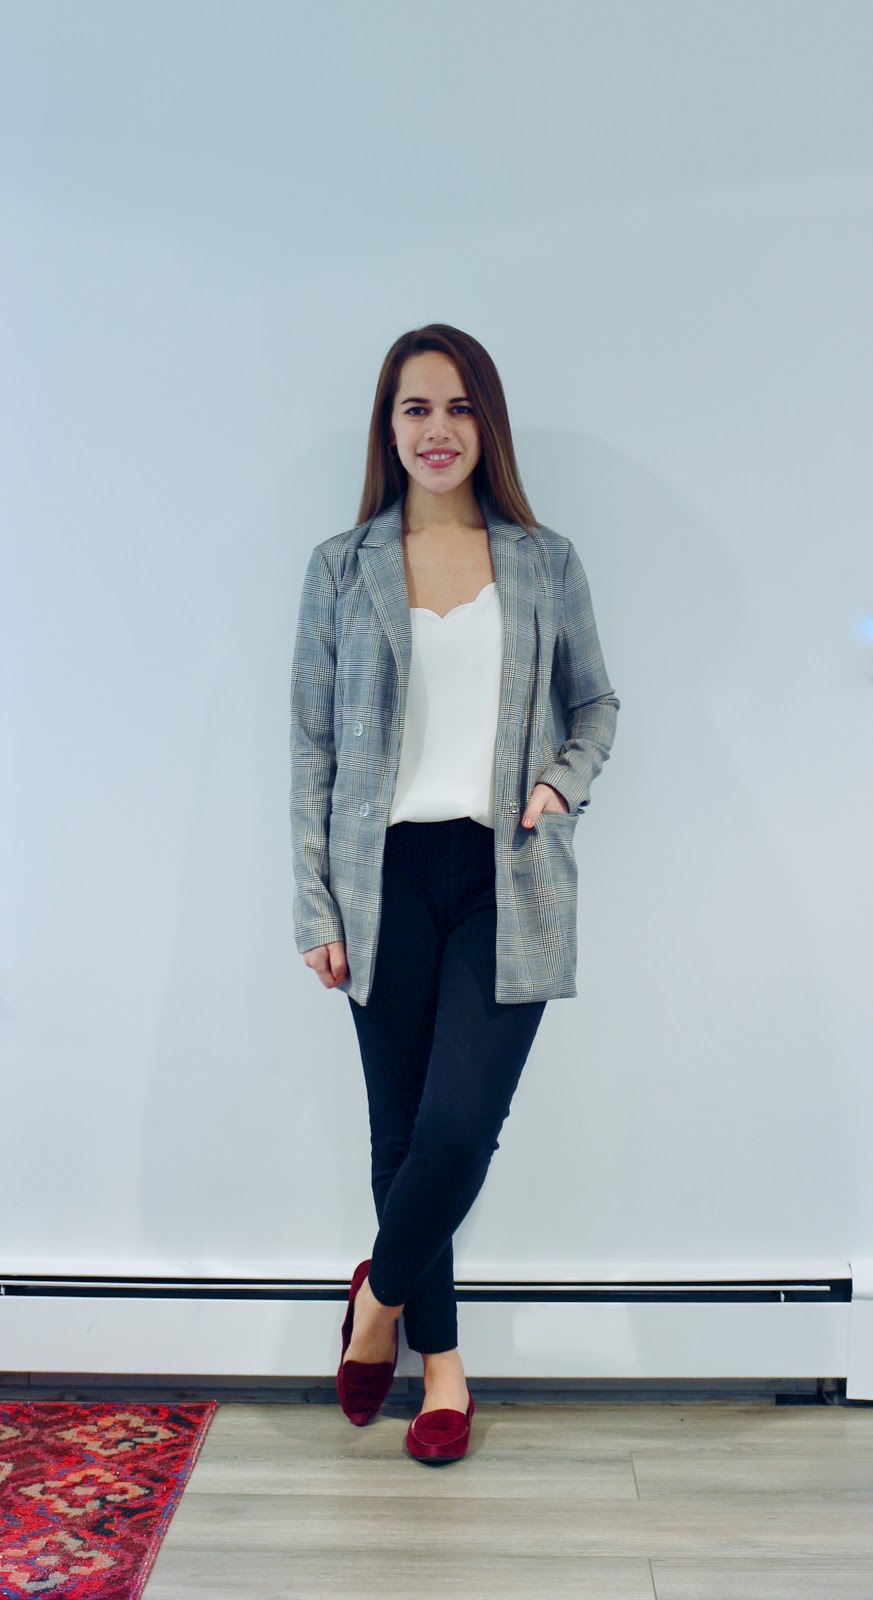 Jules in Flats - Oversized Plaid Blazer (Business Casual Fall Workwear on a Budget)